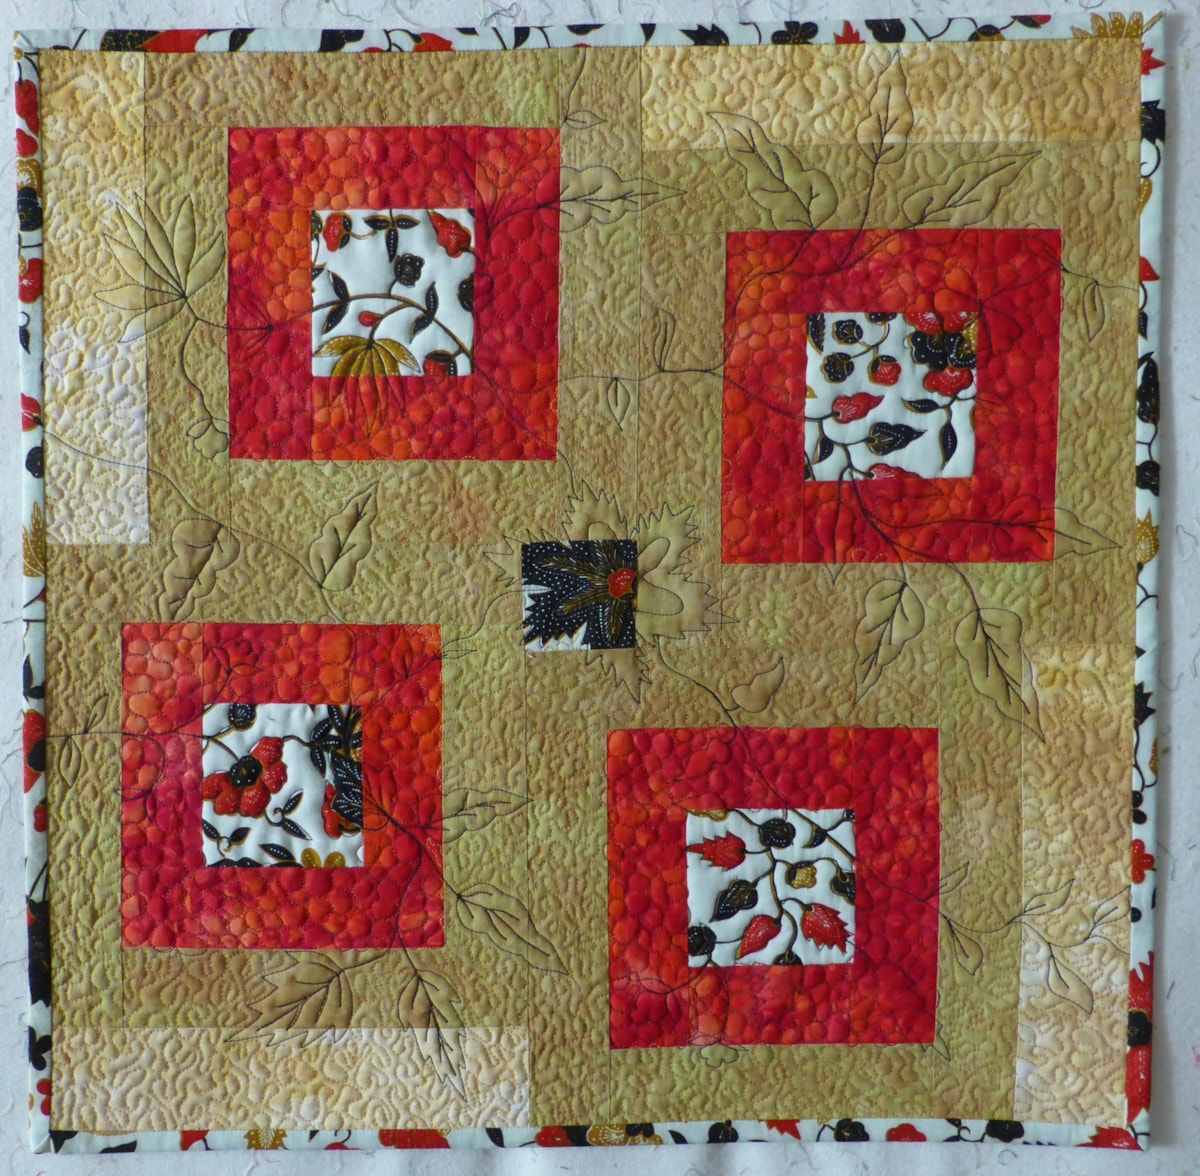 By Anne Maundrell. http://www.annemaundrelldesigns.com My version of the scrappy 20 x 20 made with some of my hand dyed fabrics left over from other projects and a bit of batik sarong fabric more than 20 years old. This was fun to do and a great opportunity to practice some free motion quilting too.